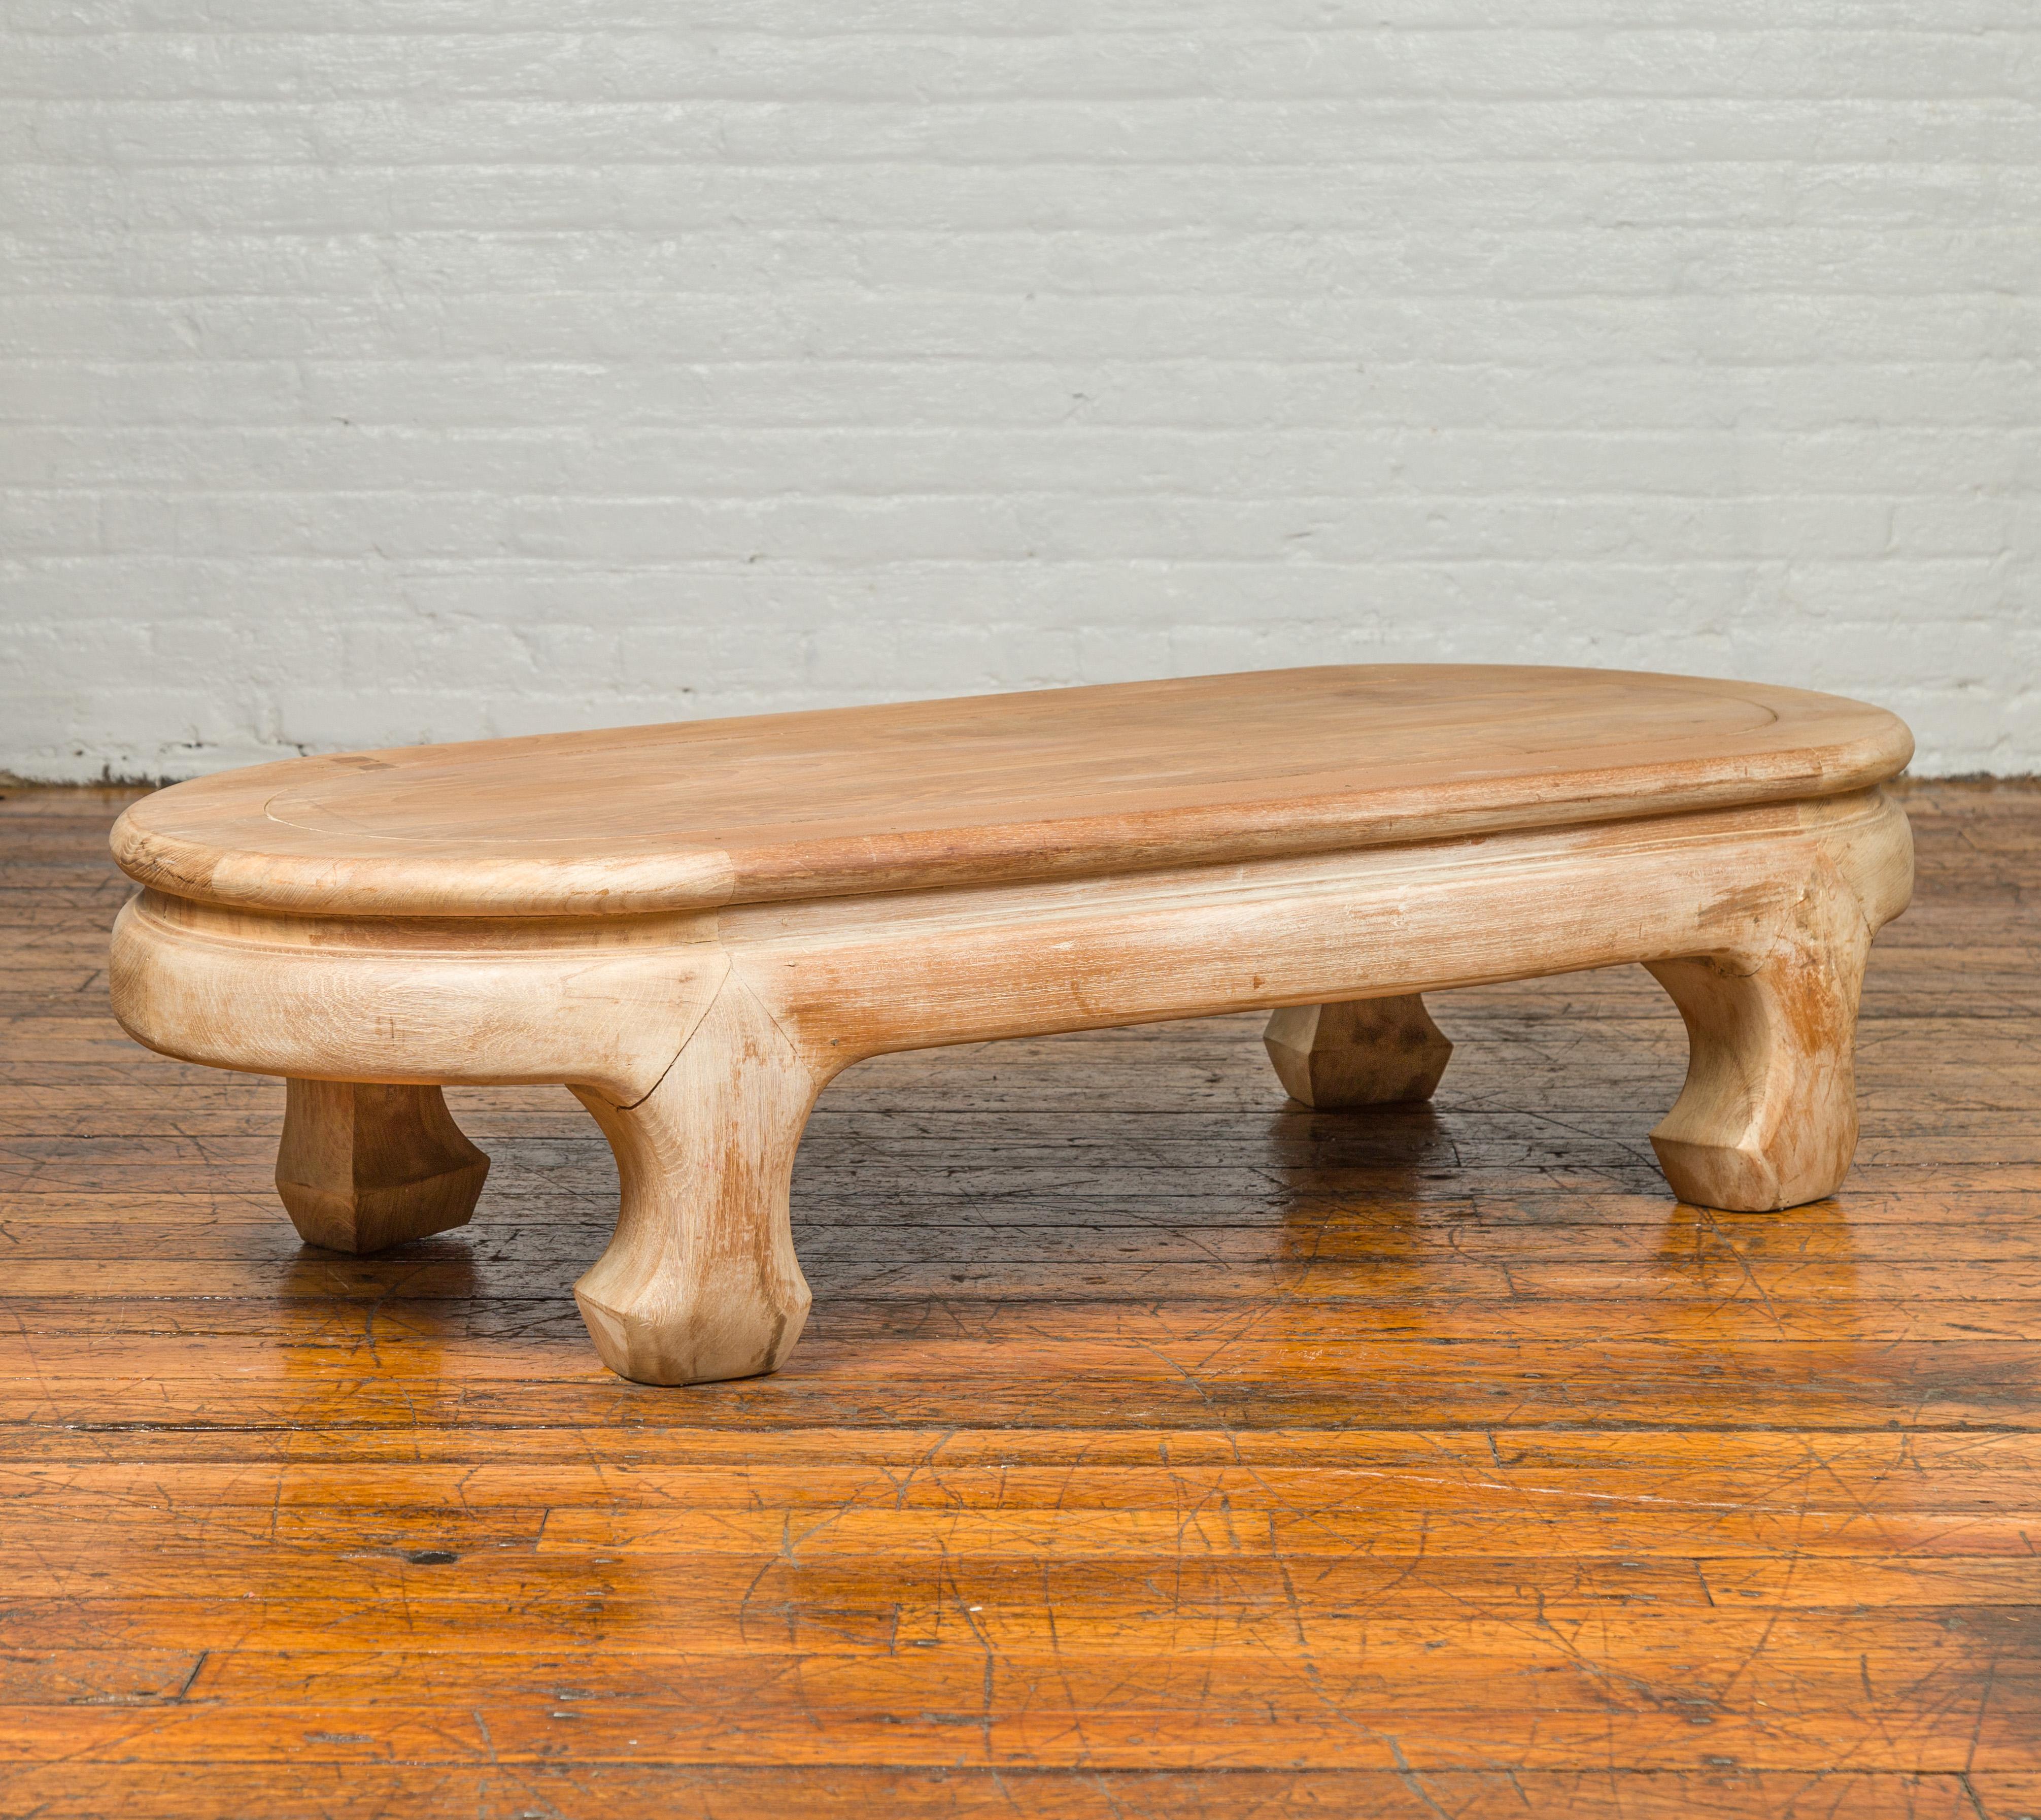 A vintage Thai teak wood oval top coffee table from the mid-20th century, with whitewash finish and chow legs. Crafted in Thailand during the mid-century period, this teak wood coffee table features an oval waisted top, sitting above a base